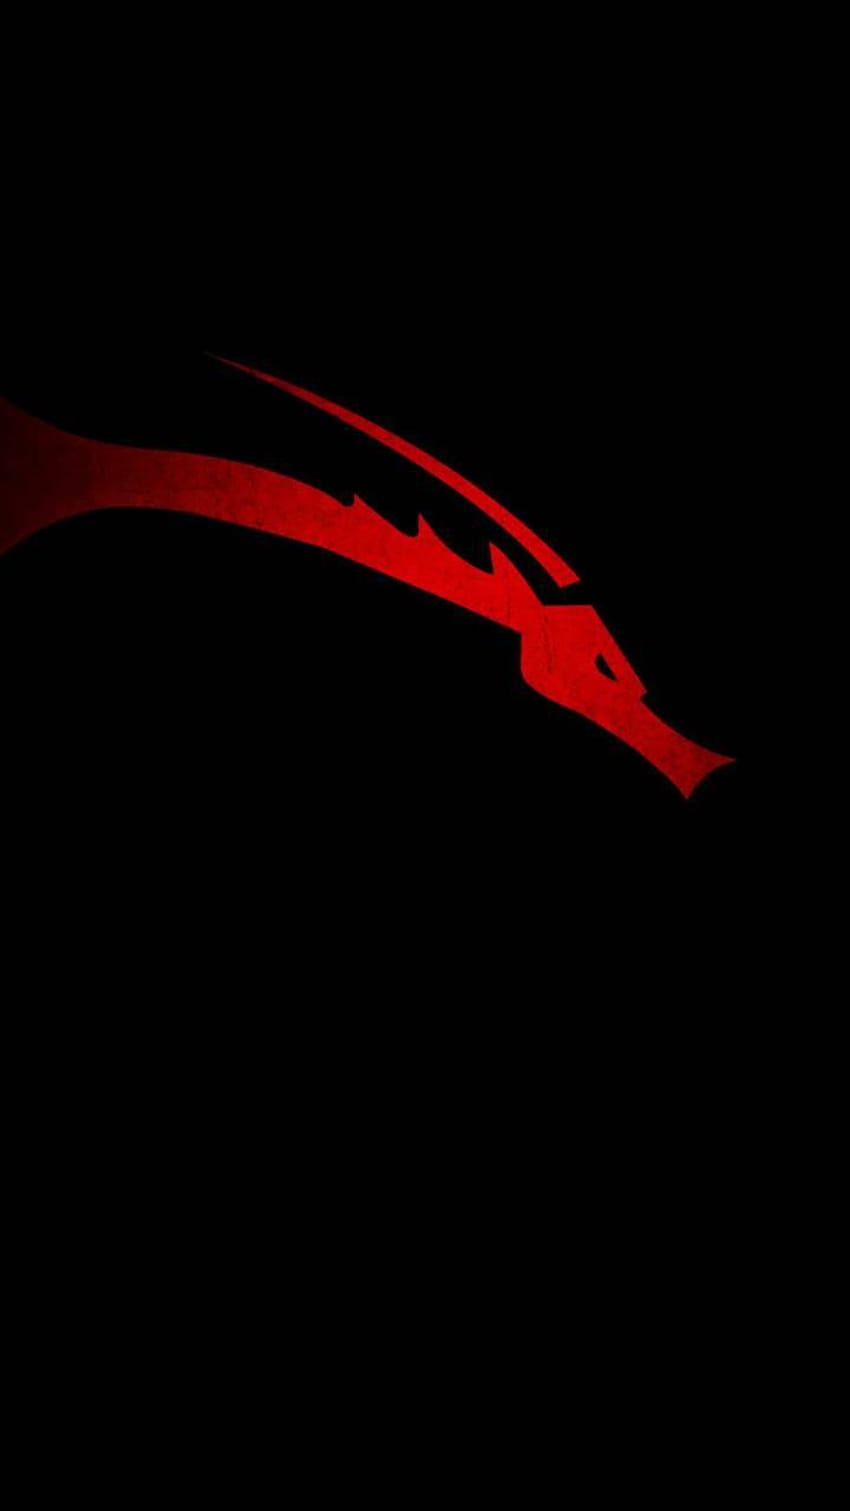 Kali Linux by mBiedy, kali android HD phone wallpaper